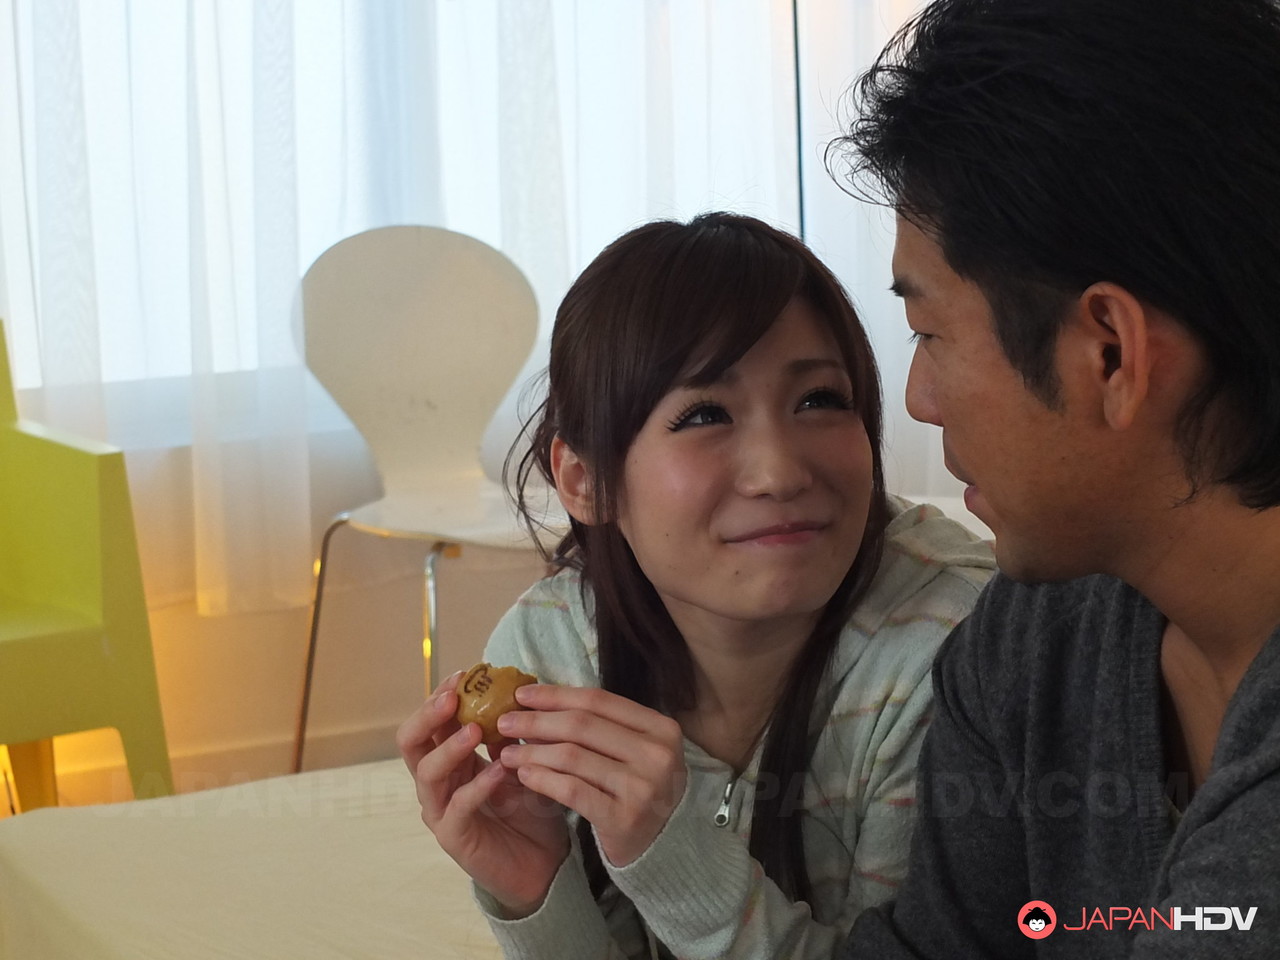 Asian nymphos with hot bodies Koi Miyamura and Tsukushi toy each other's clam ポルノ写真 #427162243 | Japan HDV Pics, Koi Miyamura, Tsukushi, Japanese, モバイルポルノ